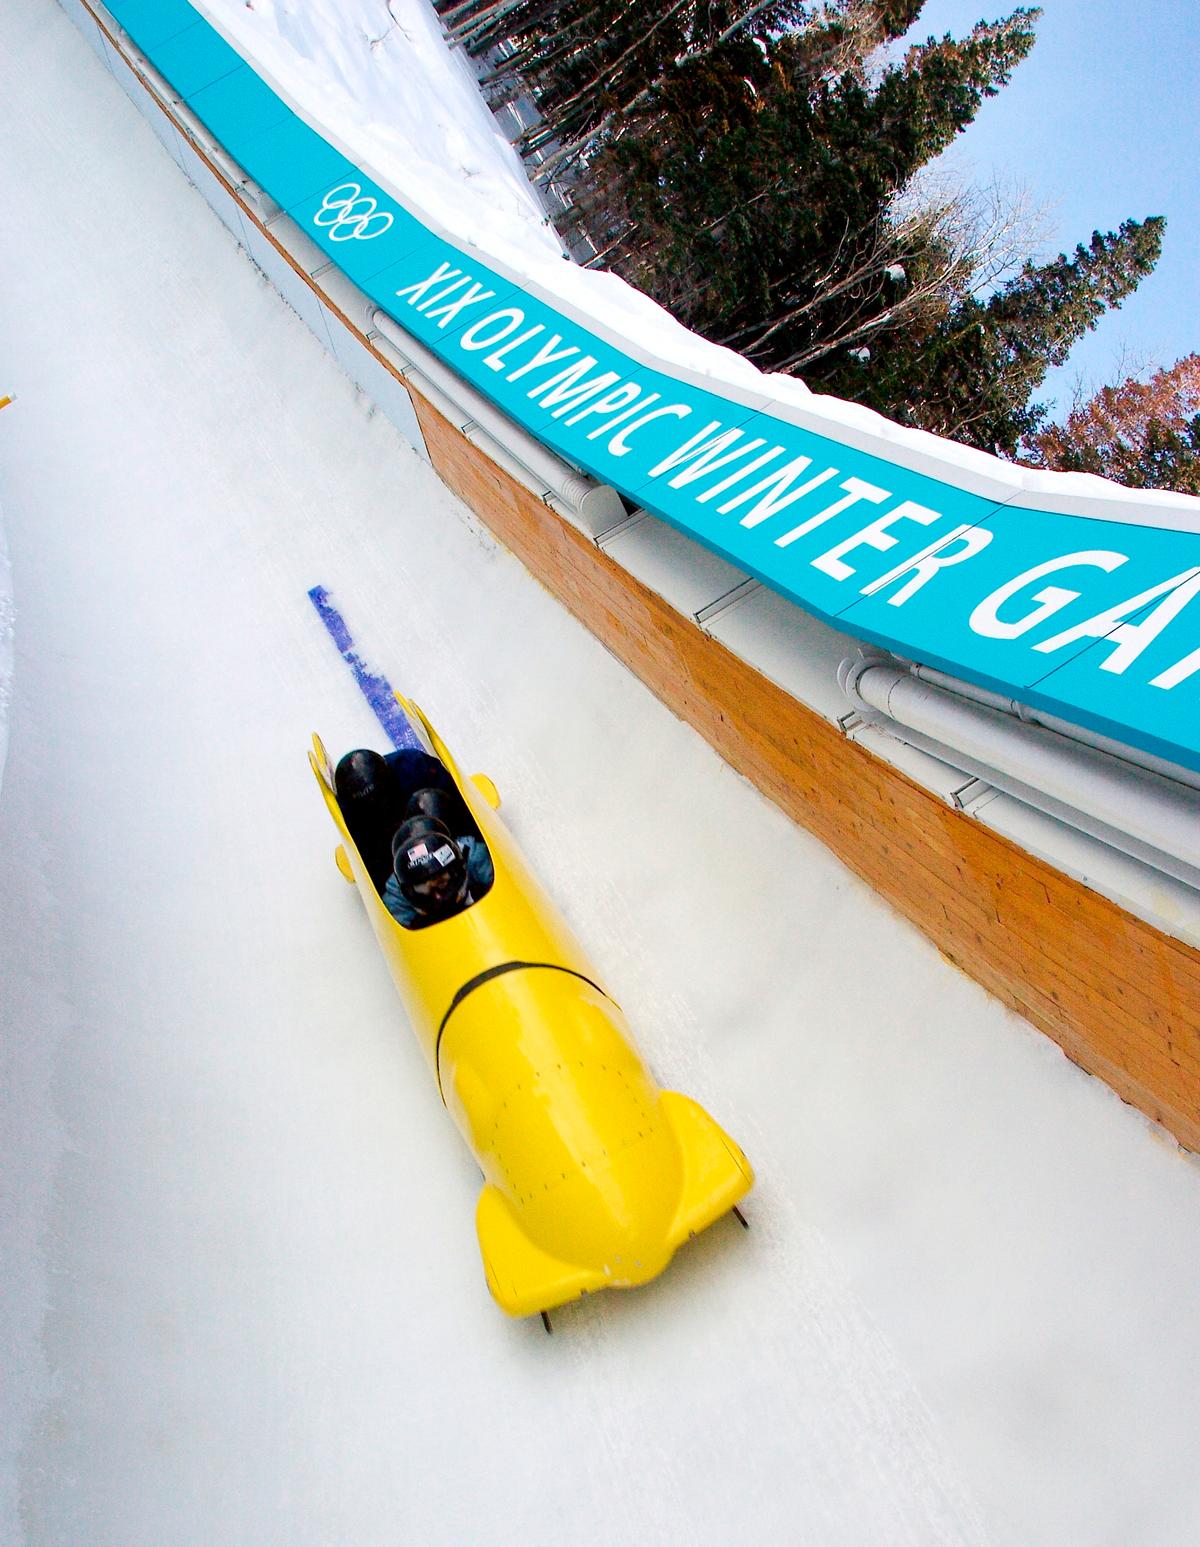 Tourists ride the Winter Comet Bobsled at the Utah Olympic Park, which is the actual track used in the 2002 Winter Olympics. (Utah Olympic Park)